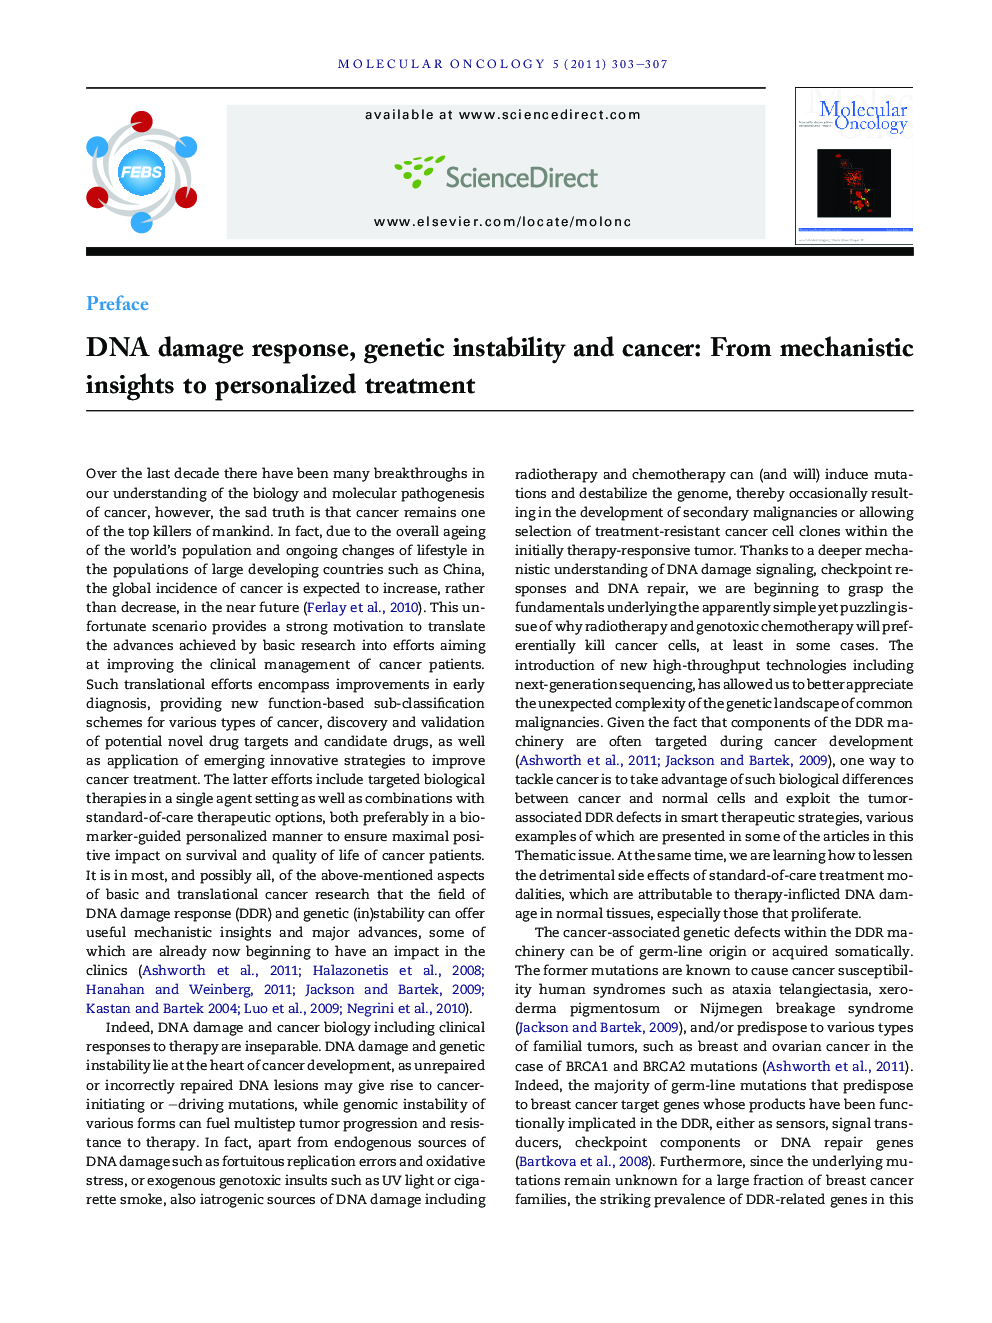 DNA damage response, genetic instability and cancer: From mechanistic insights to personalized treatment